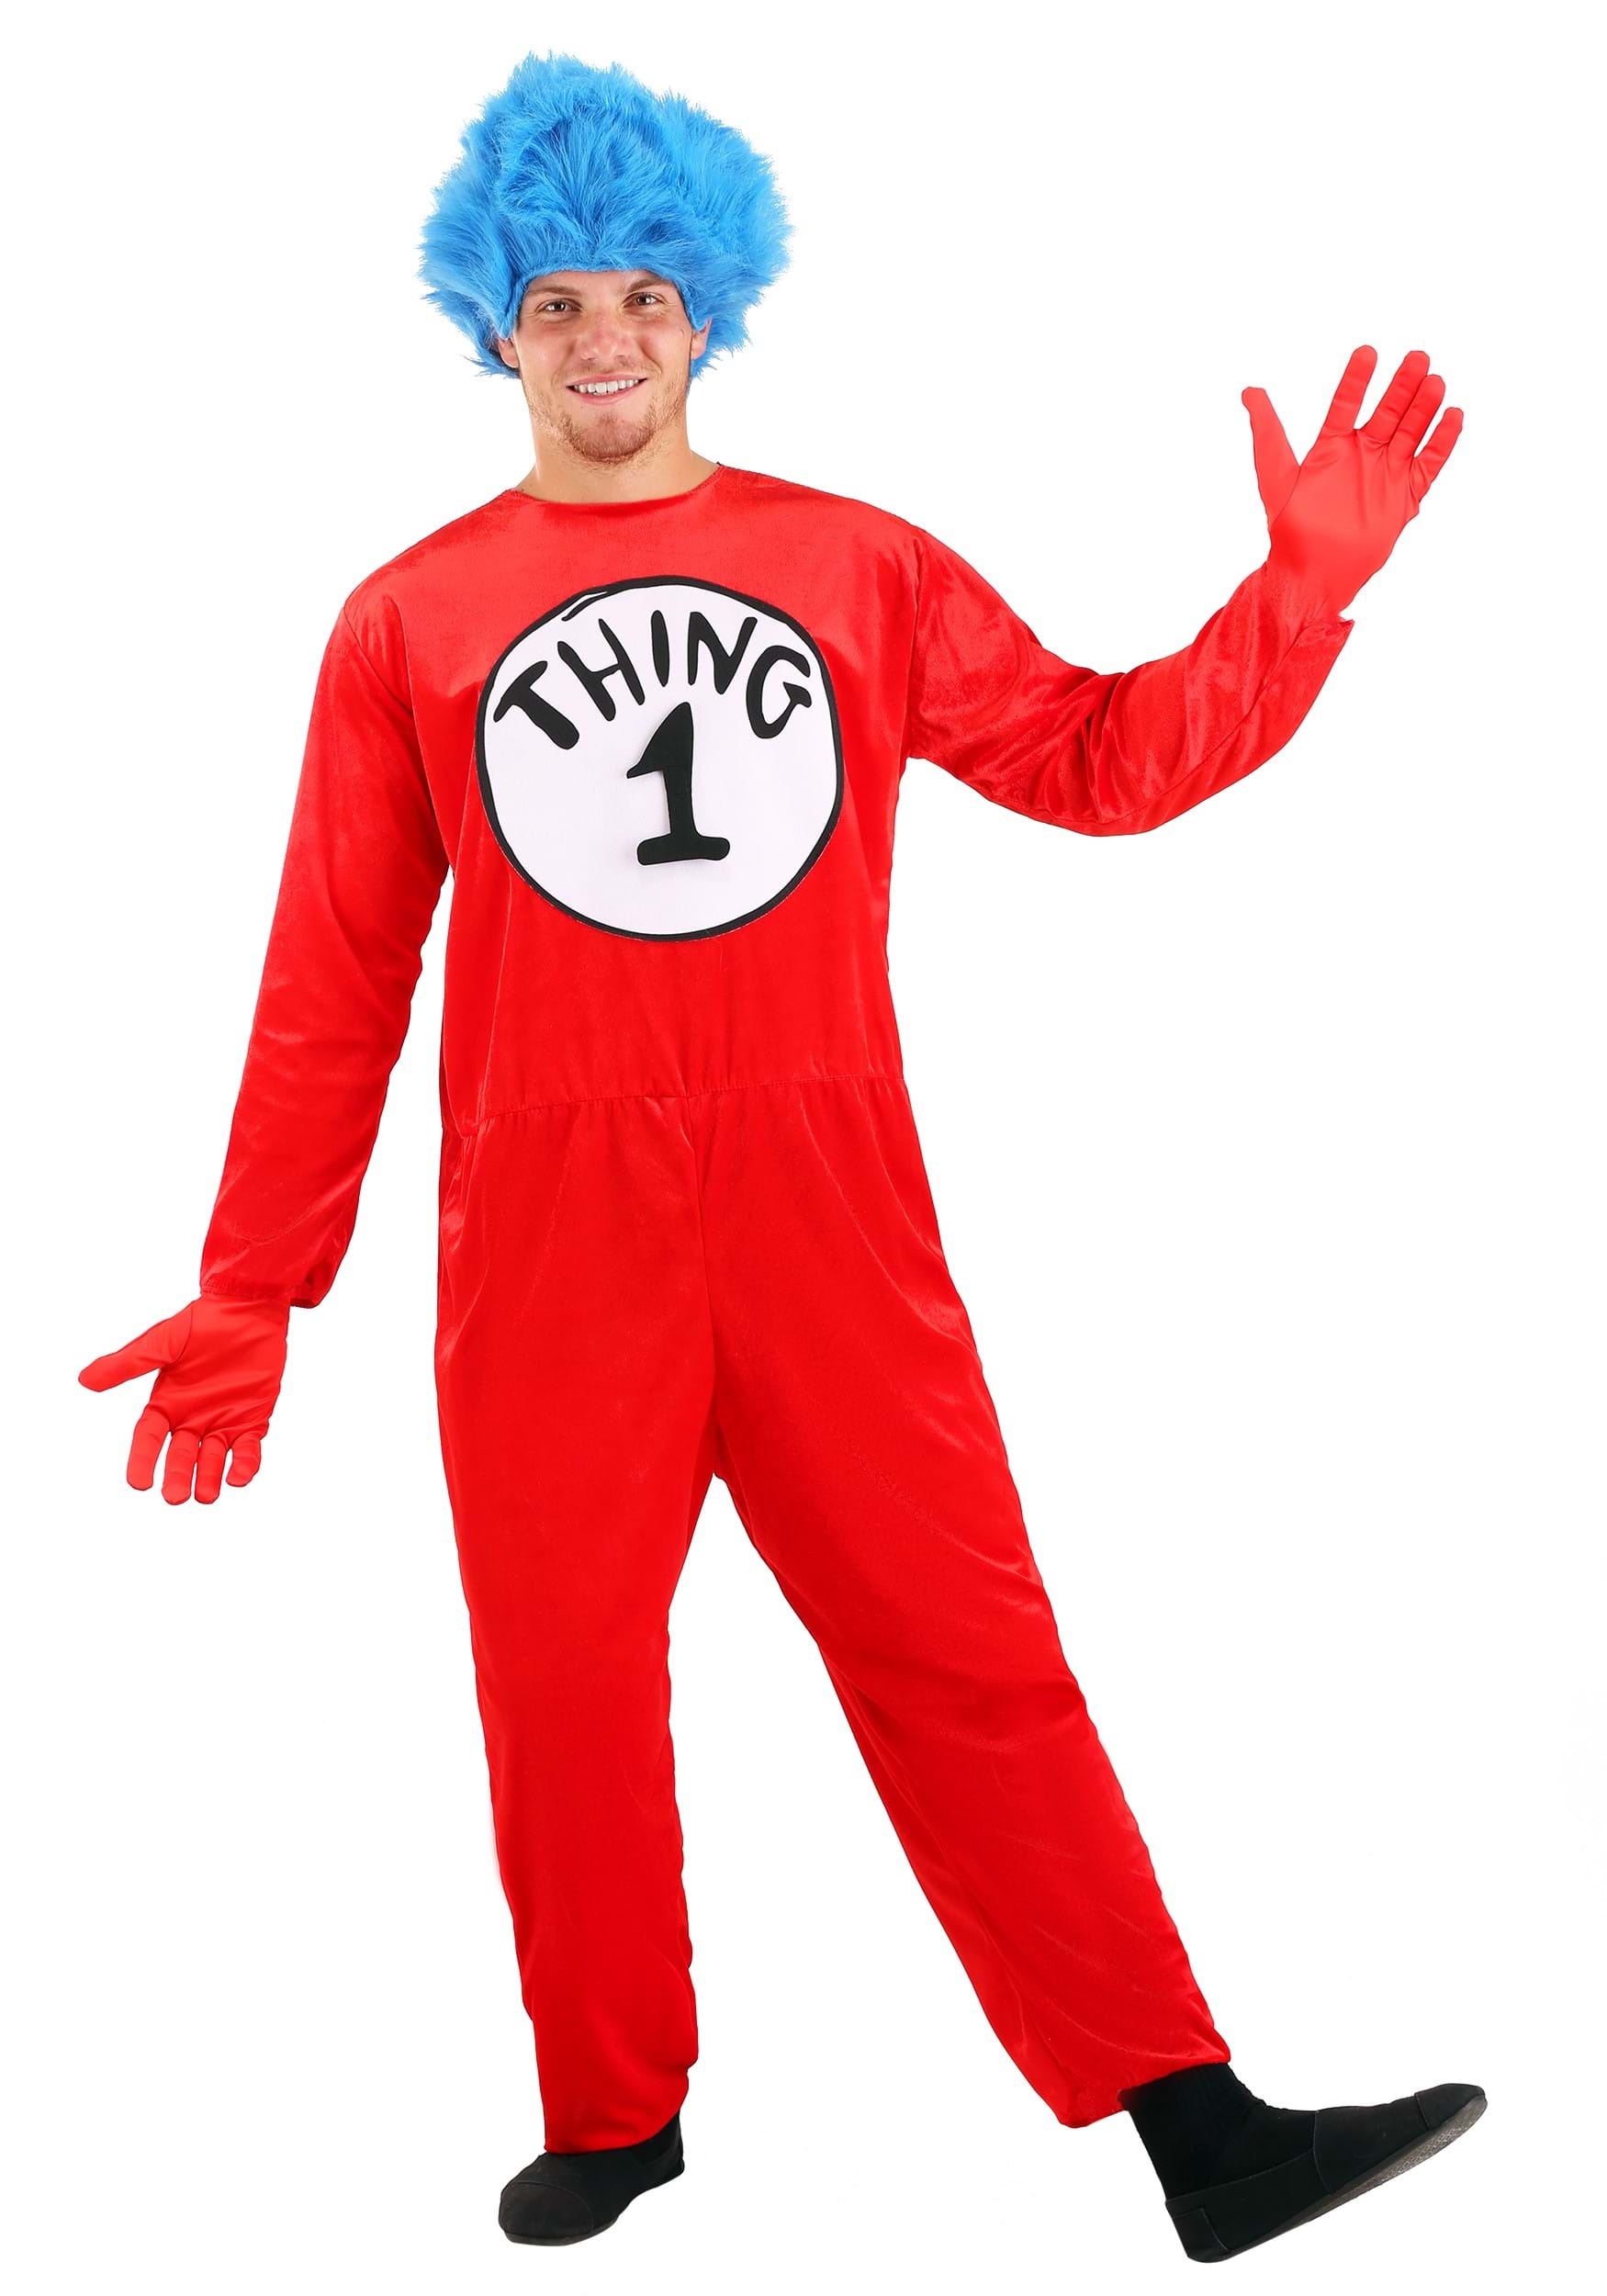 Photos - Fancy Dress FUN Costumes Adult Thing 1 & Thing 2 Costume | Dr. Seuss Costumes Blue/